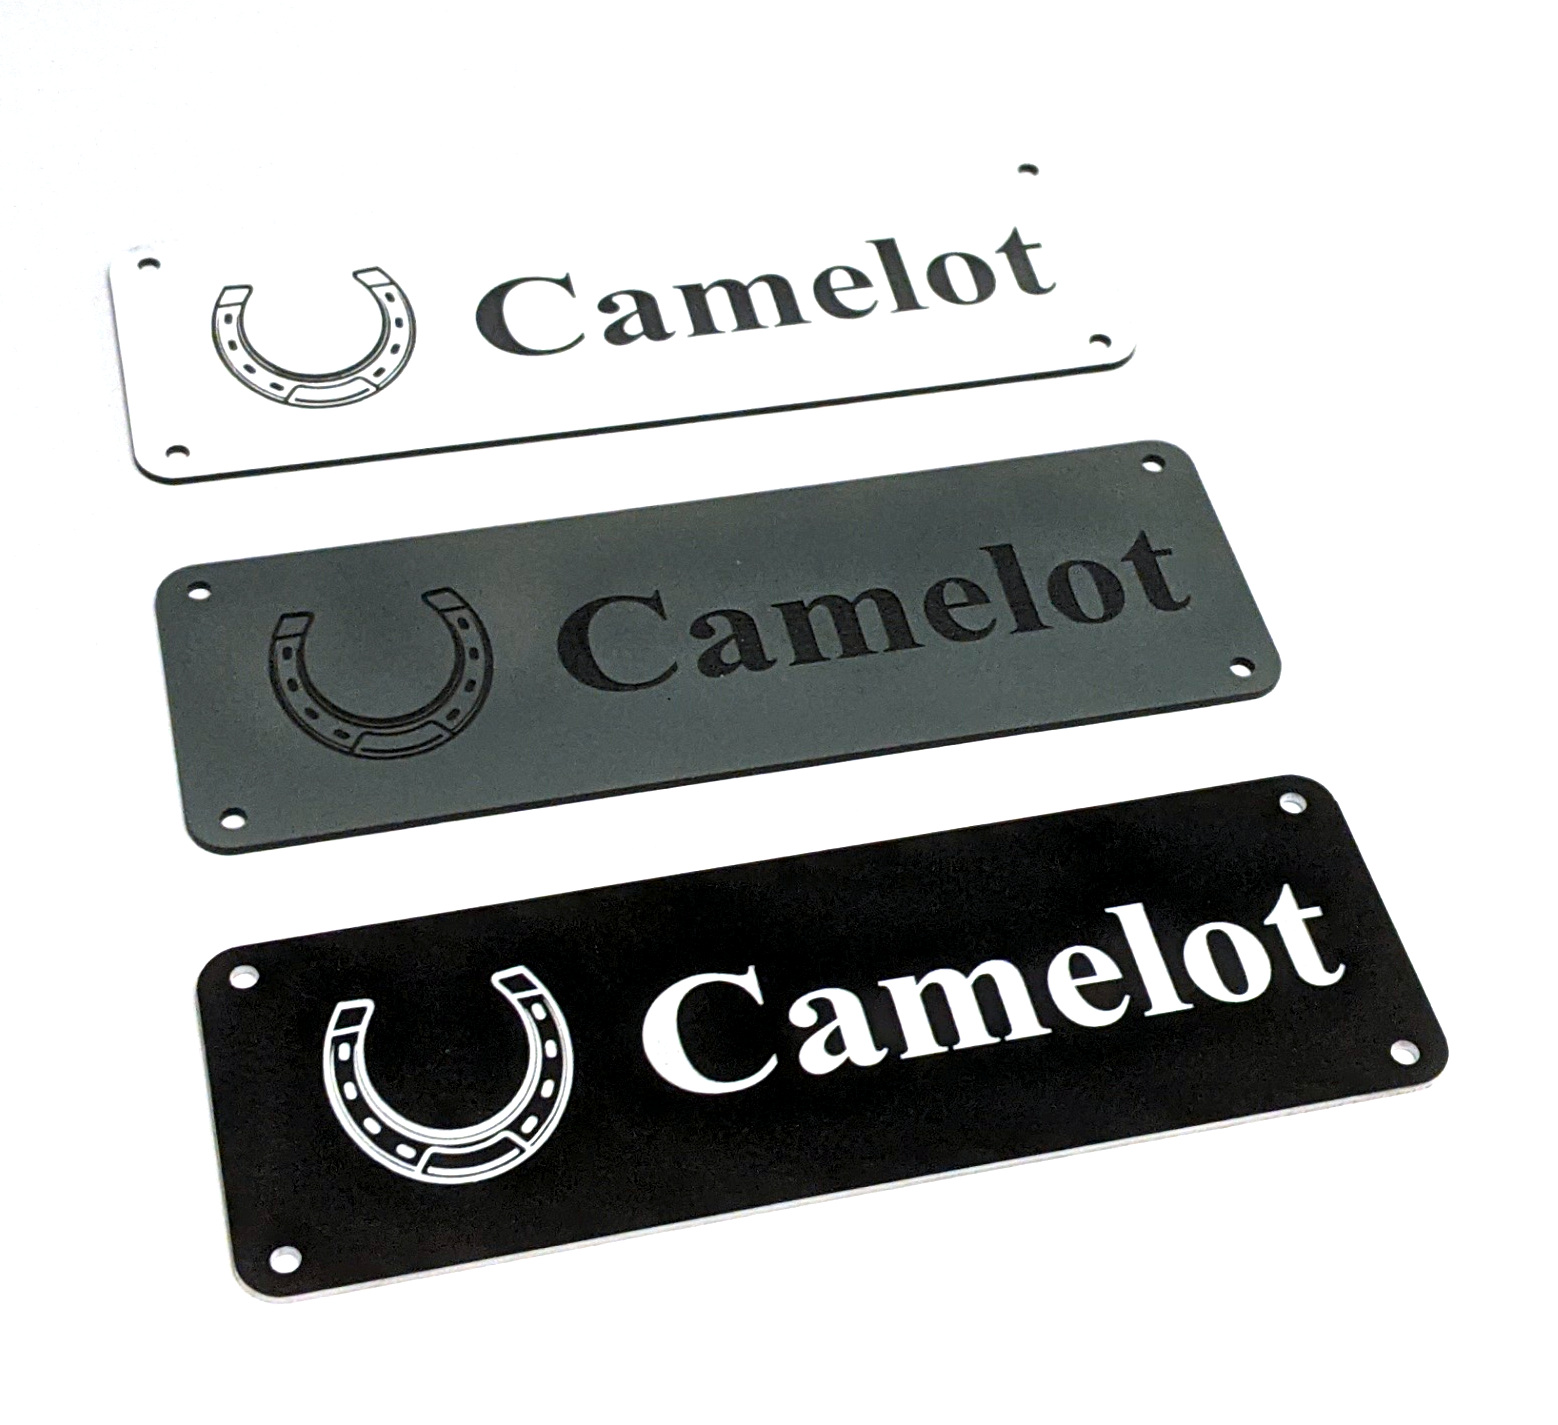 Personalised Stable Name Plaques – 6″ x 2″ with engraving of a Horseshoe on the Left-Hand side with contrasting name in the centre of the plaque, 4 screw holes in each corner.